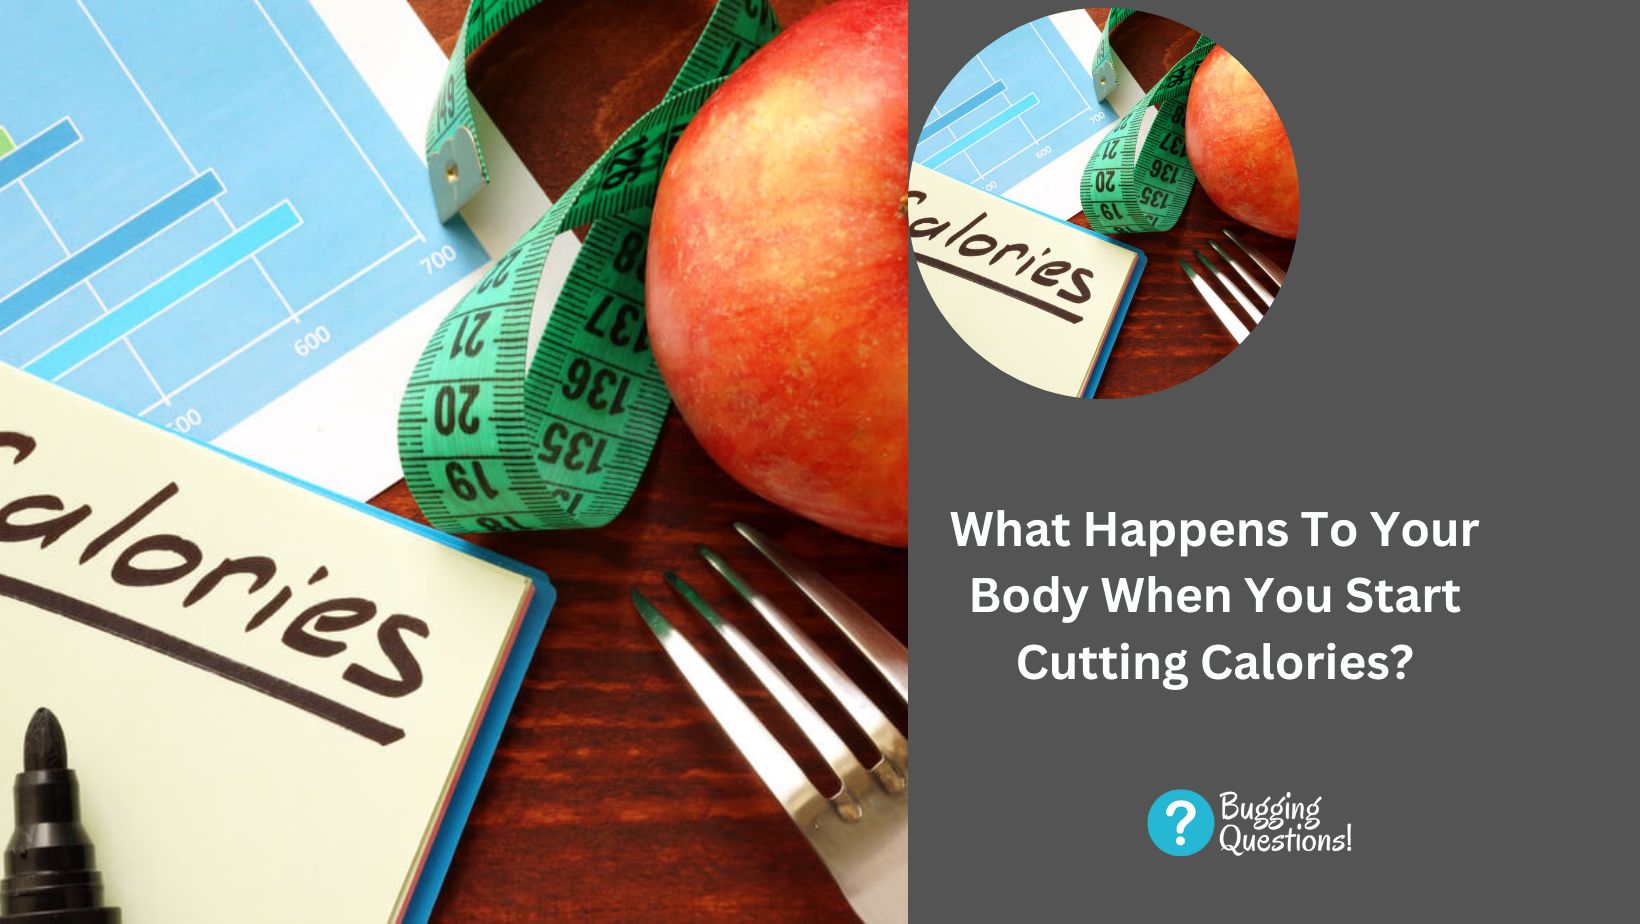 What Happens To Your Body When You Start Cutting Calories?